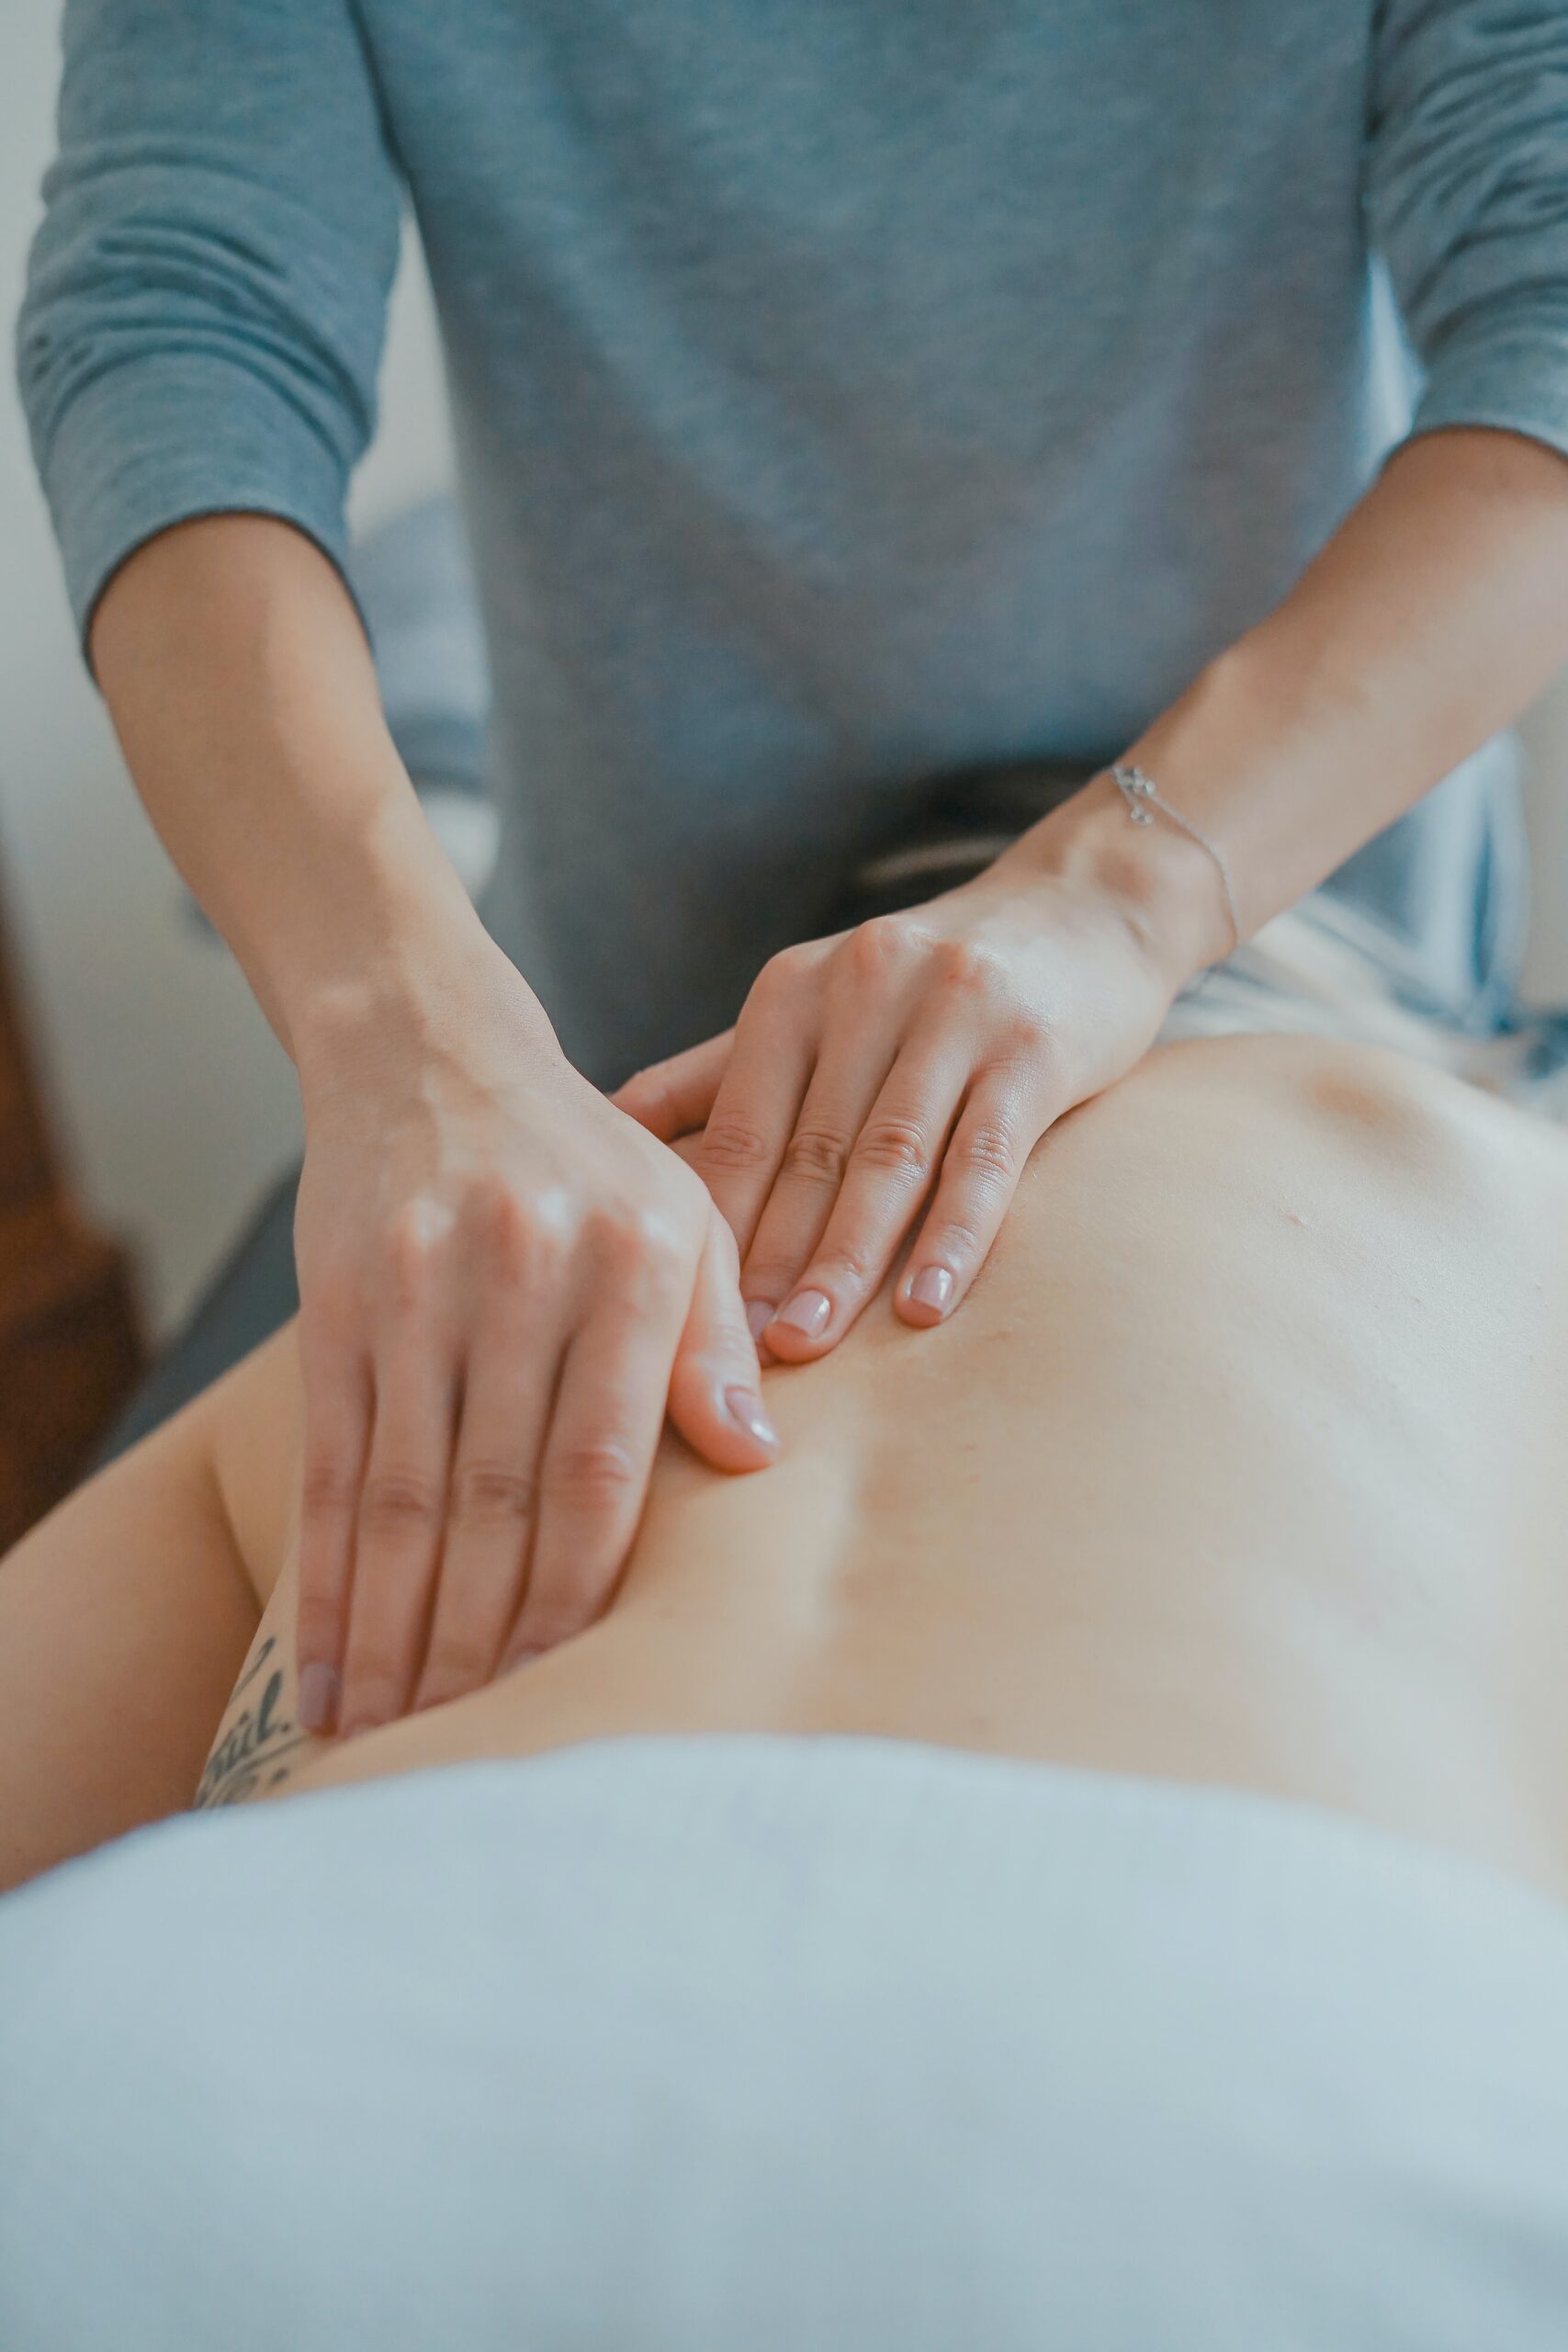 8 Ways to Know If Your Deep Tissue Massage Is Safe